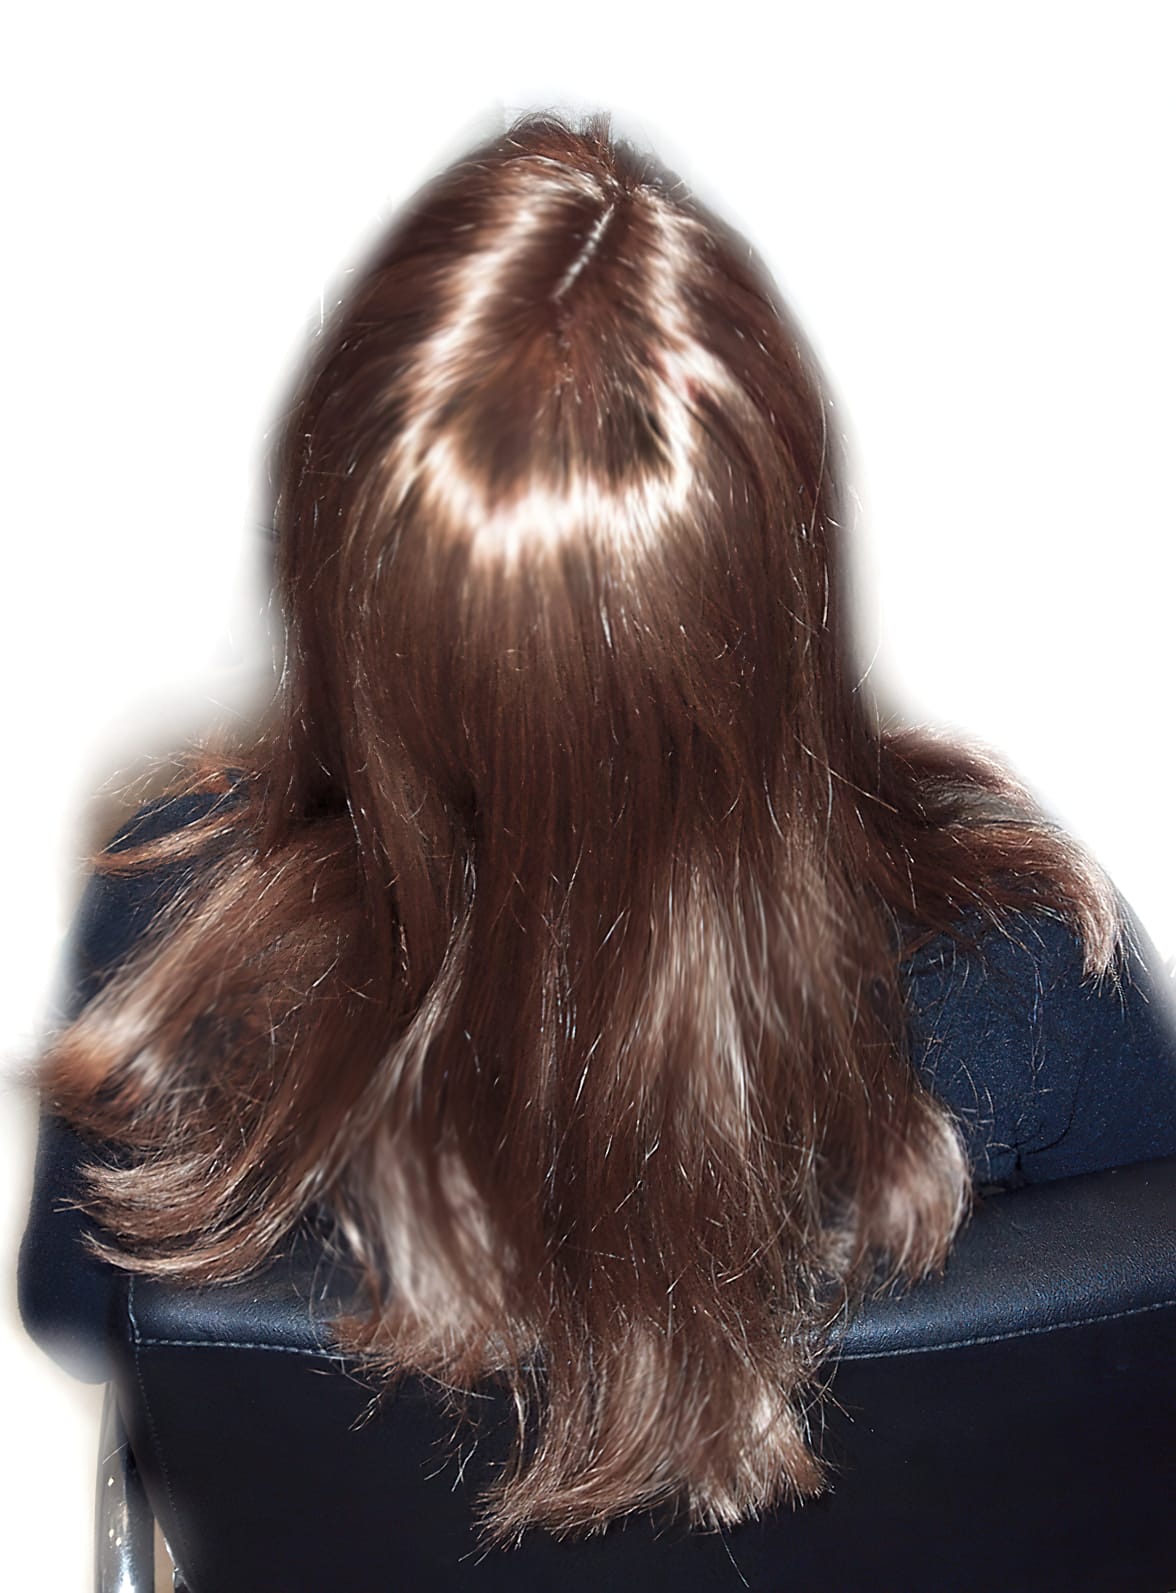 After Picture - Androgenetic Alopecia or Female Pattern Hair Loss